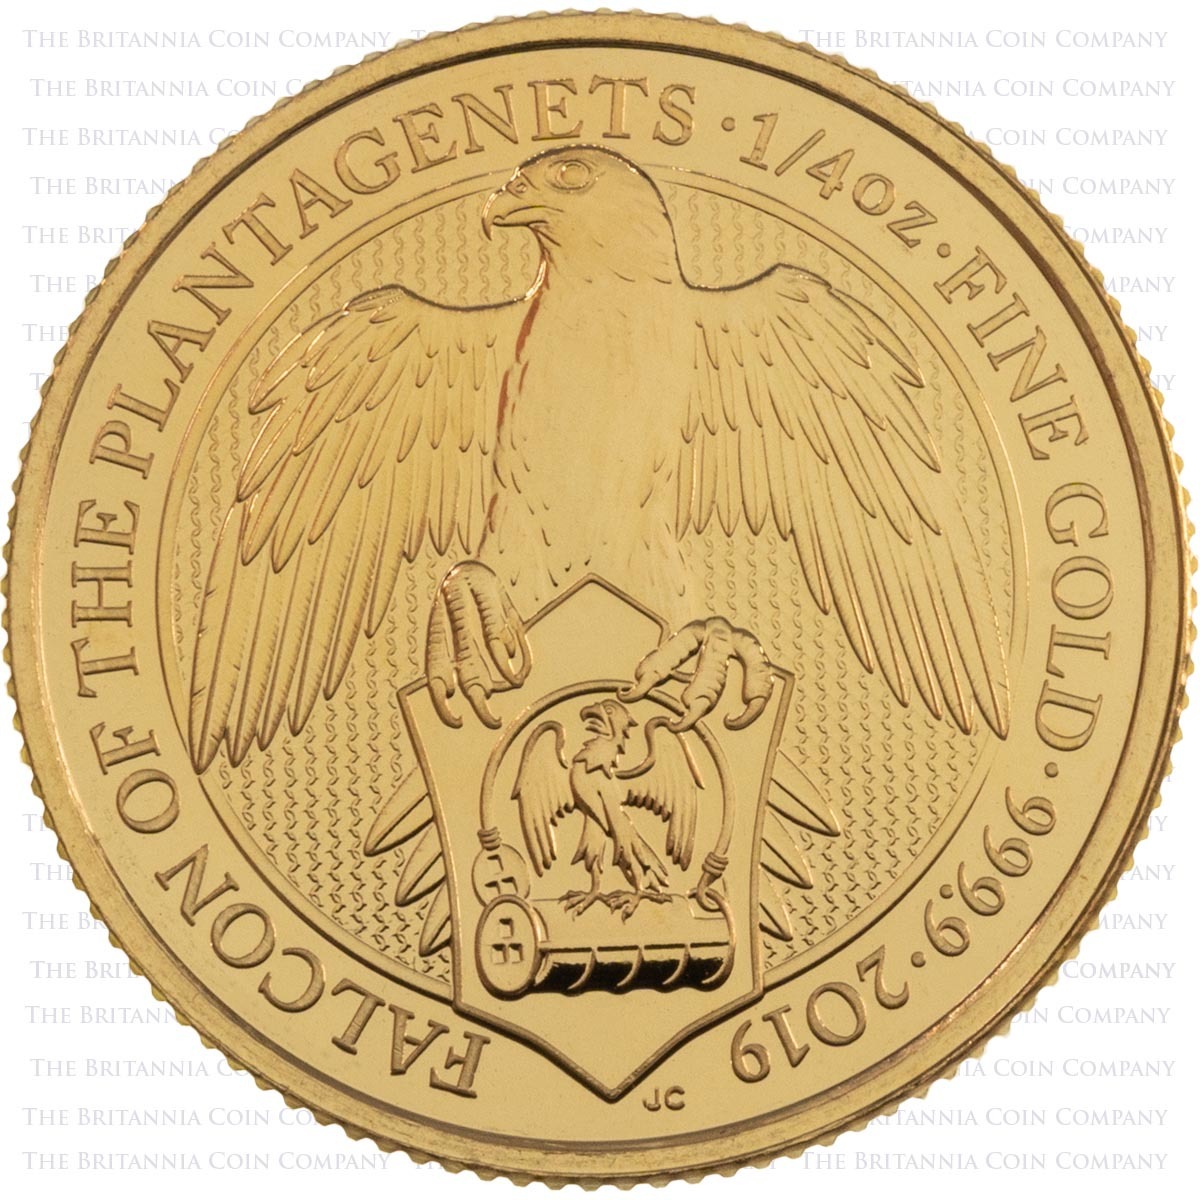 2019 Queen's Beasts Falcon Of The Plantagenets Quarter Ounce Gold Bullion Coin Reverse